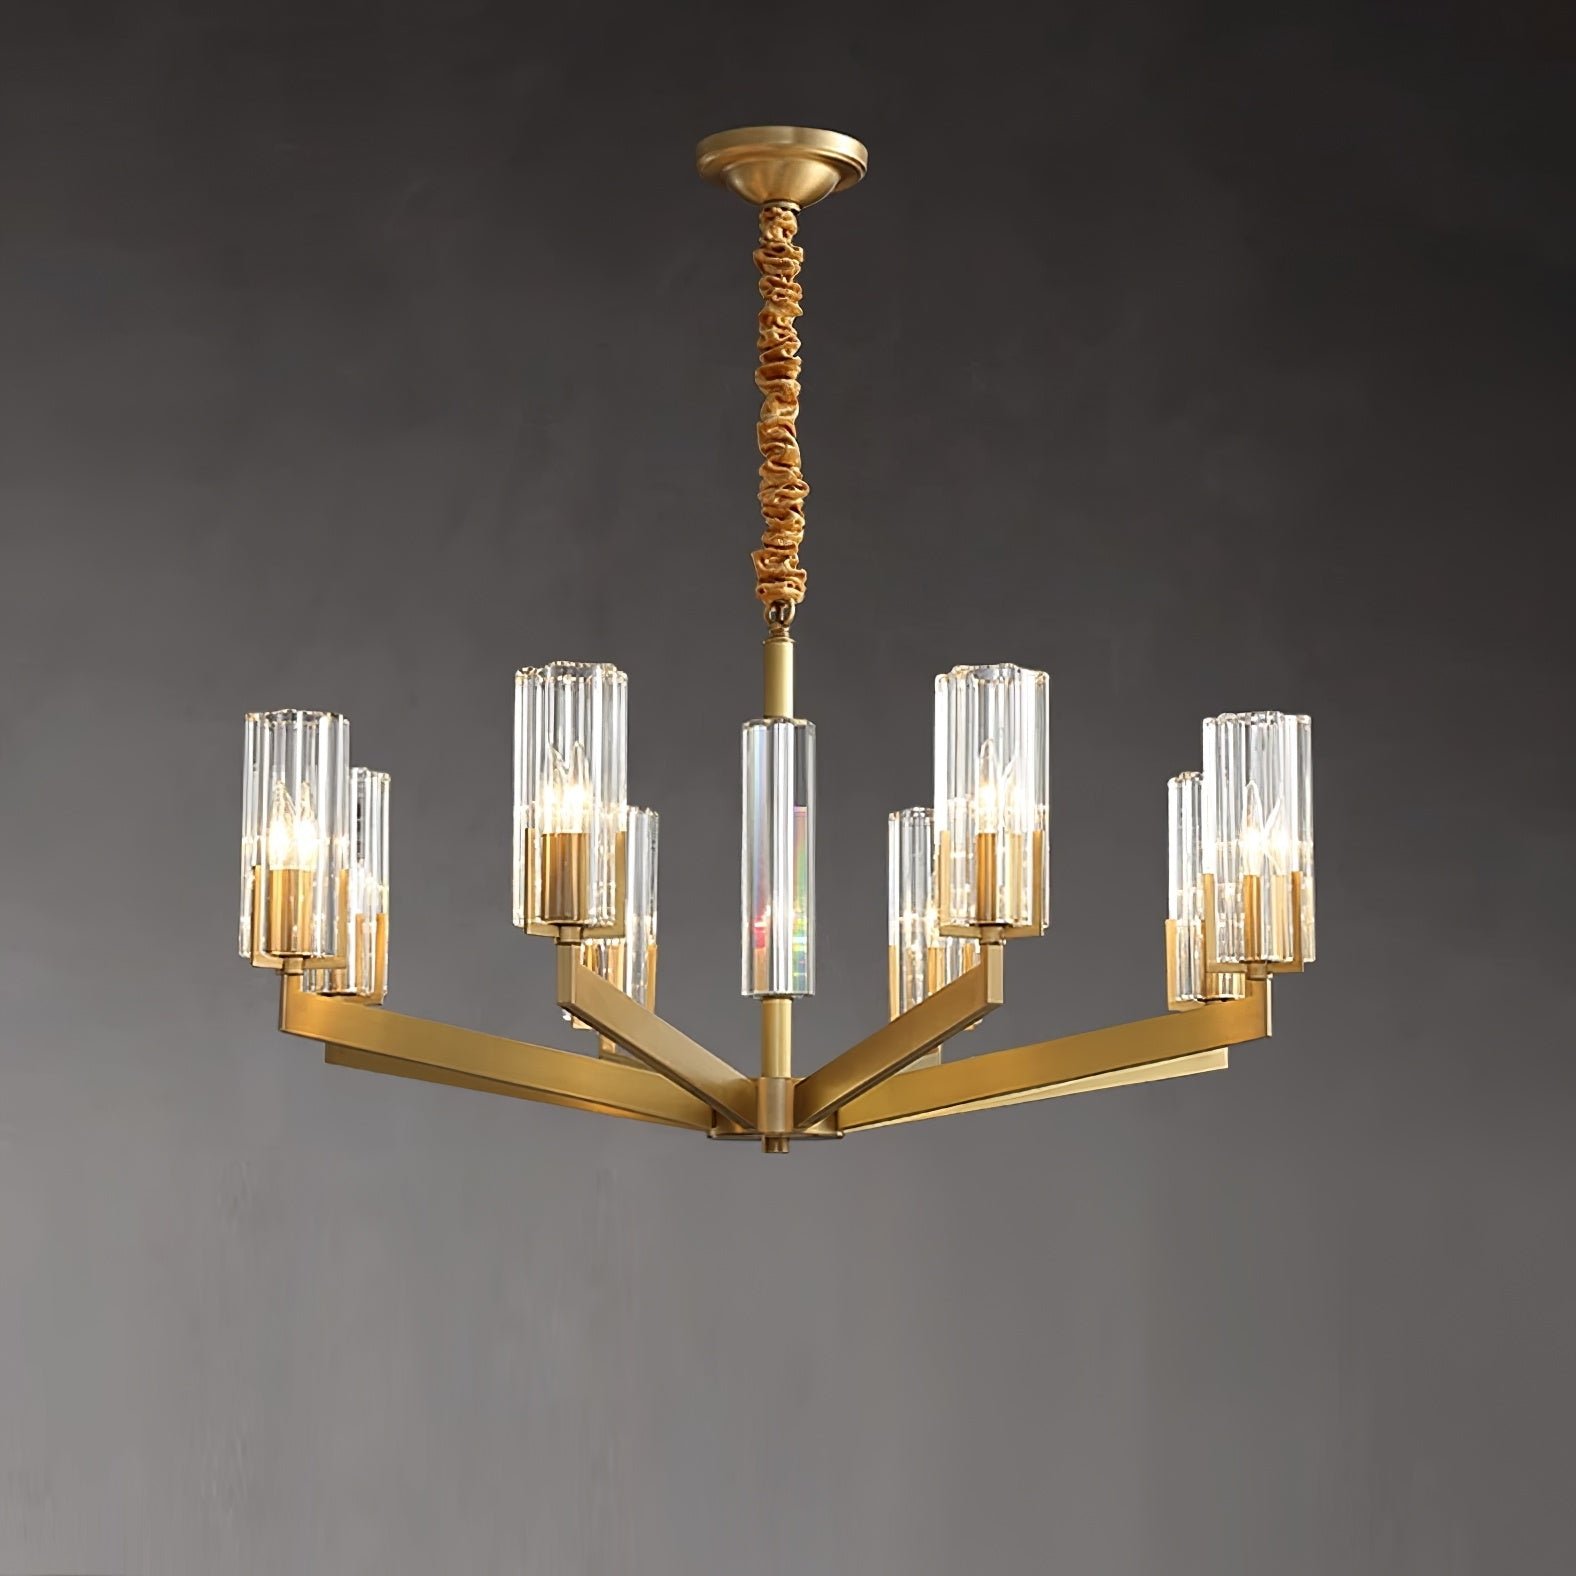 Brass Chandelier with 8 Heads, Diameter 31.4 inches and Height 16.1 inches (80cm x 41cm), in Clear and Brass Finish